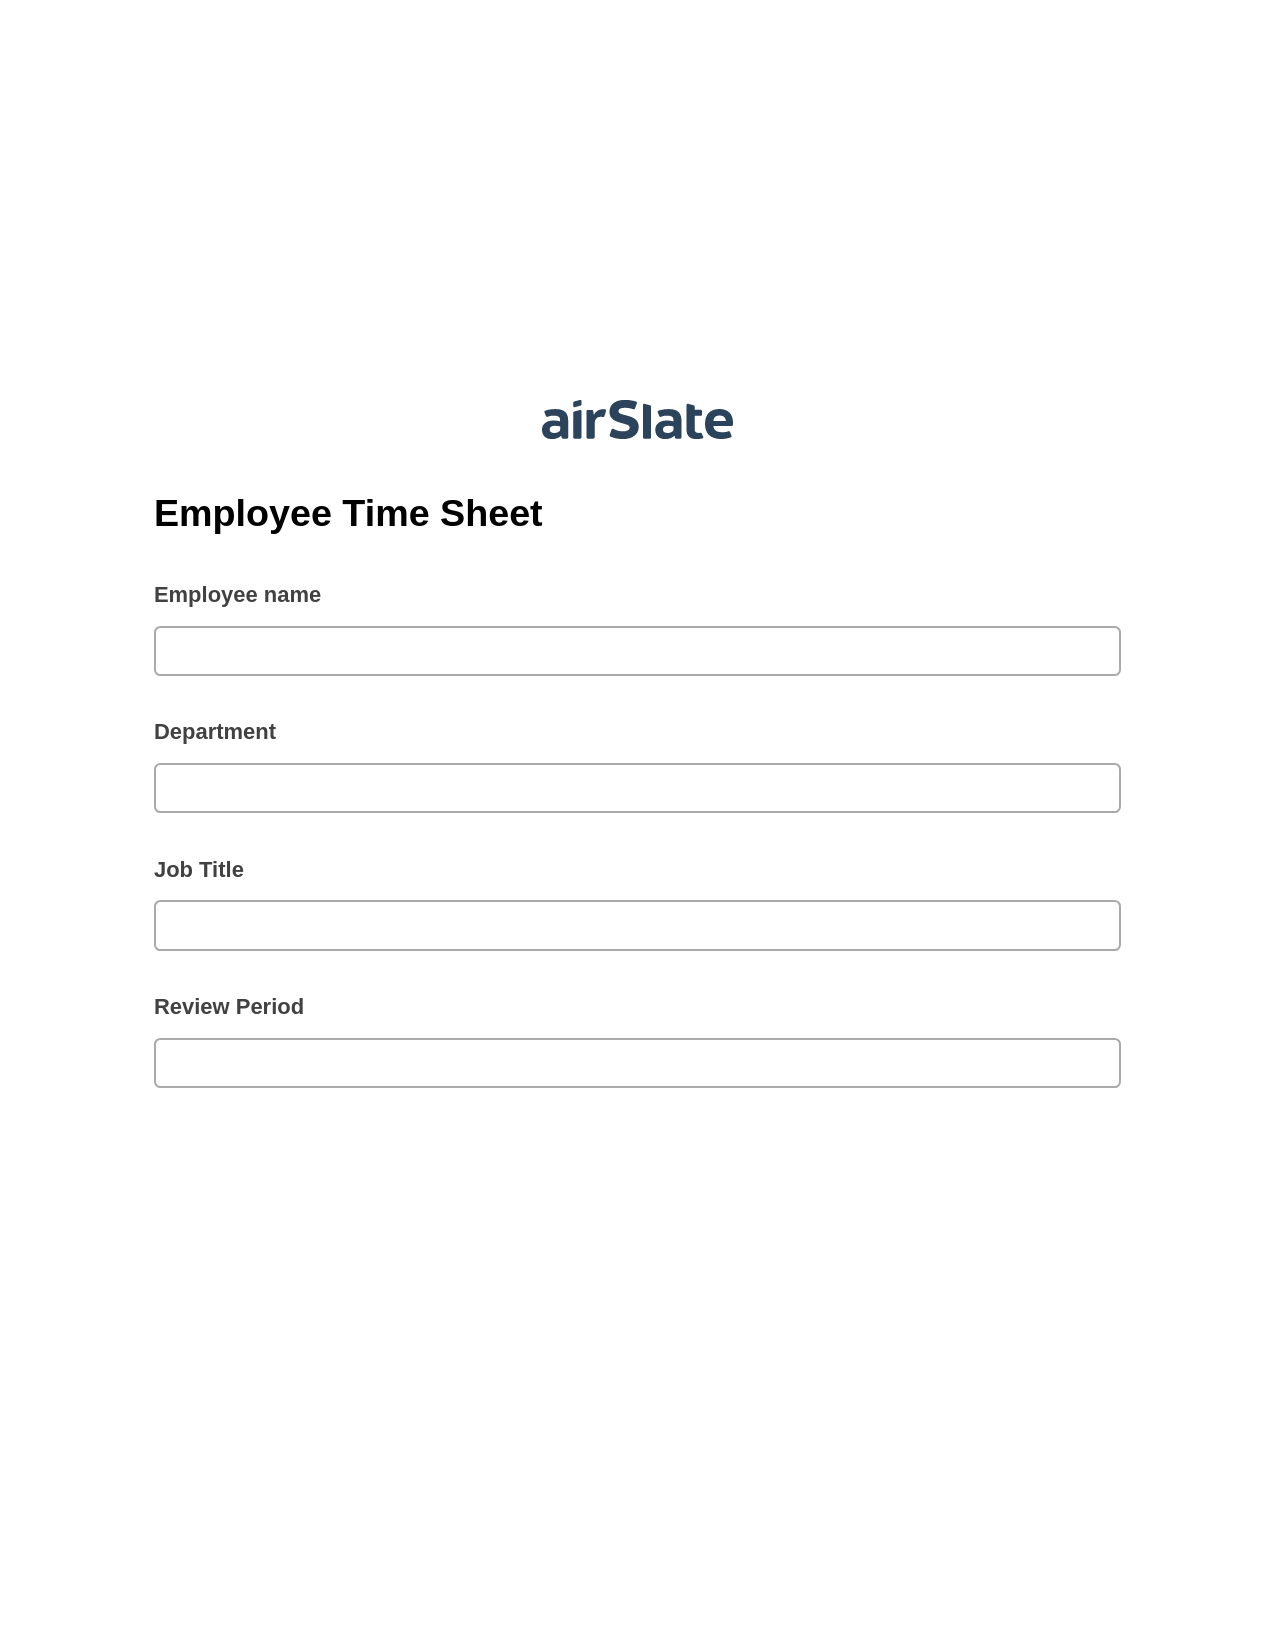 Employee Time Sheet Pre-fill Dropdowns from CSV file Bot, Update Audit Trail Bot, Archive to Box Bot